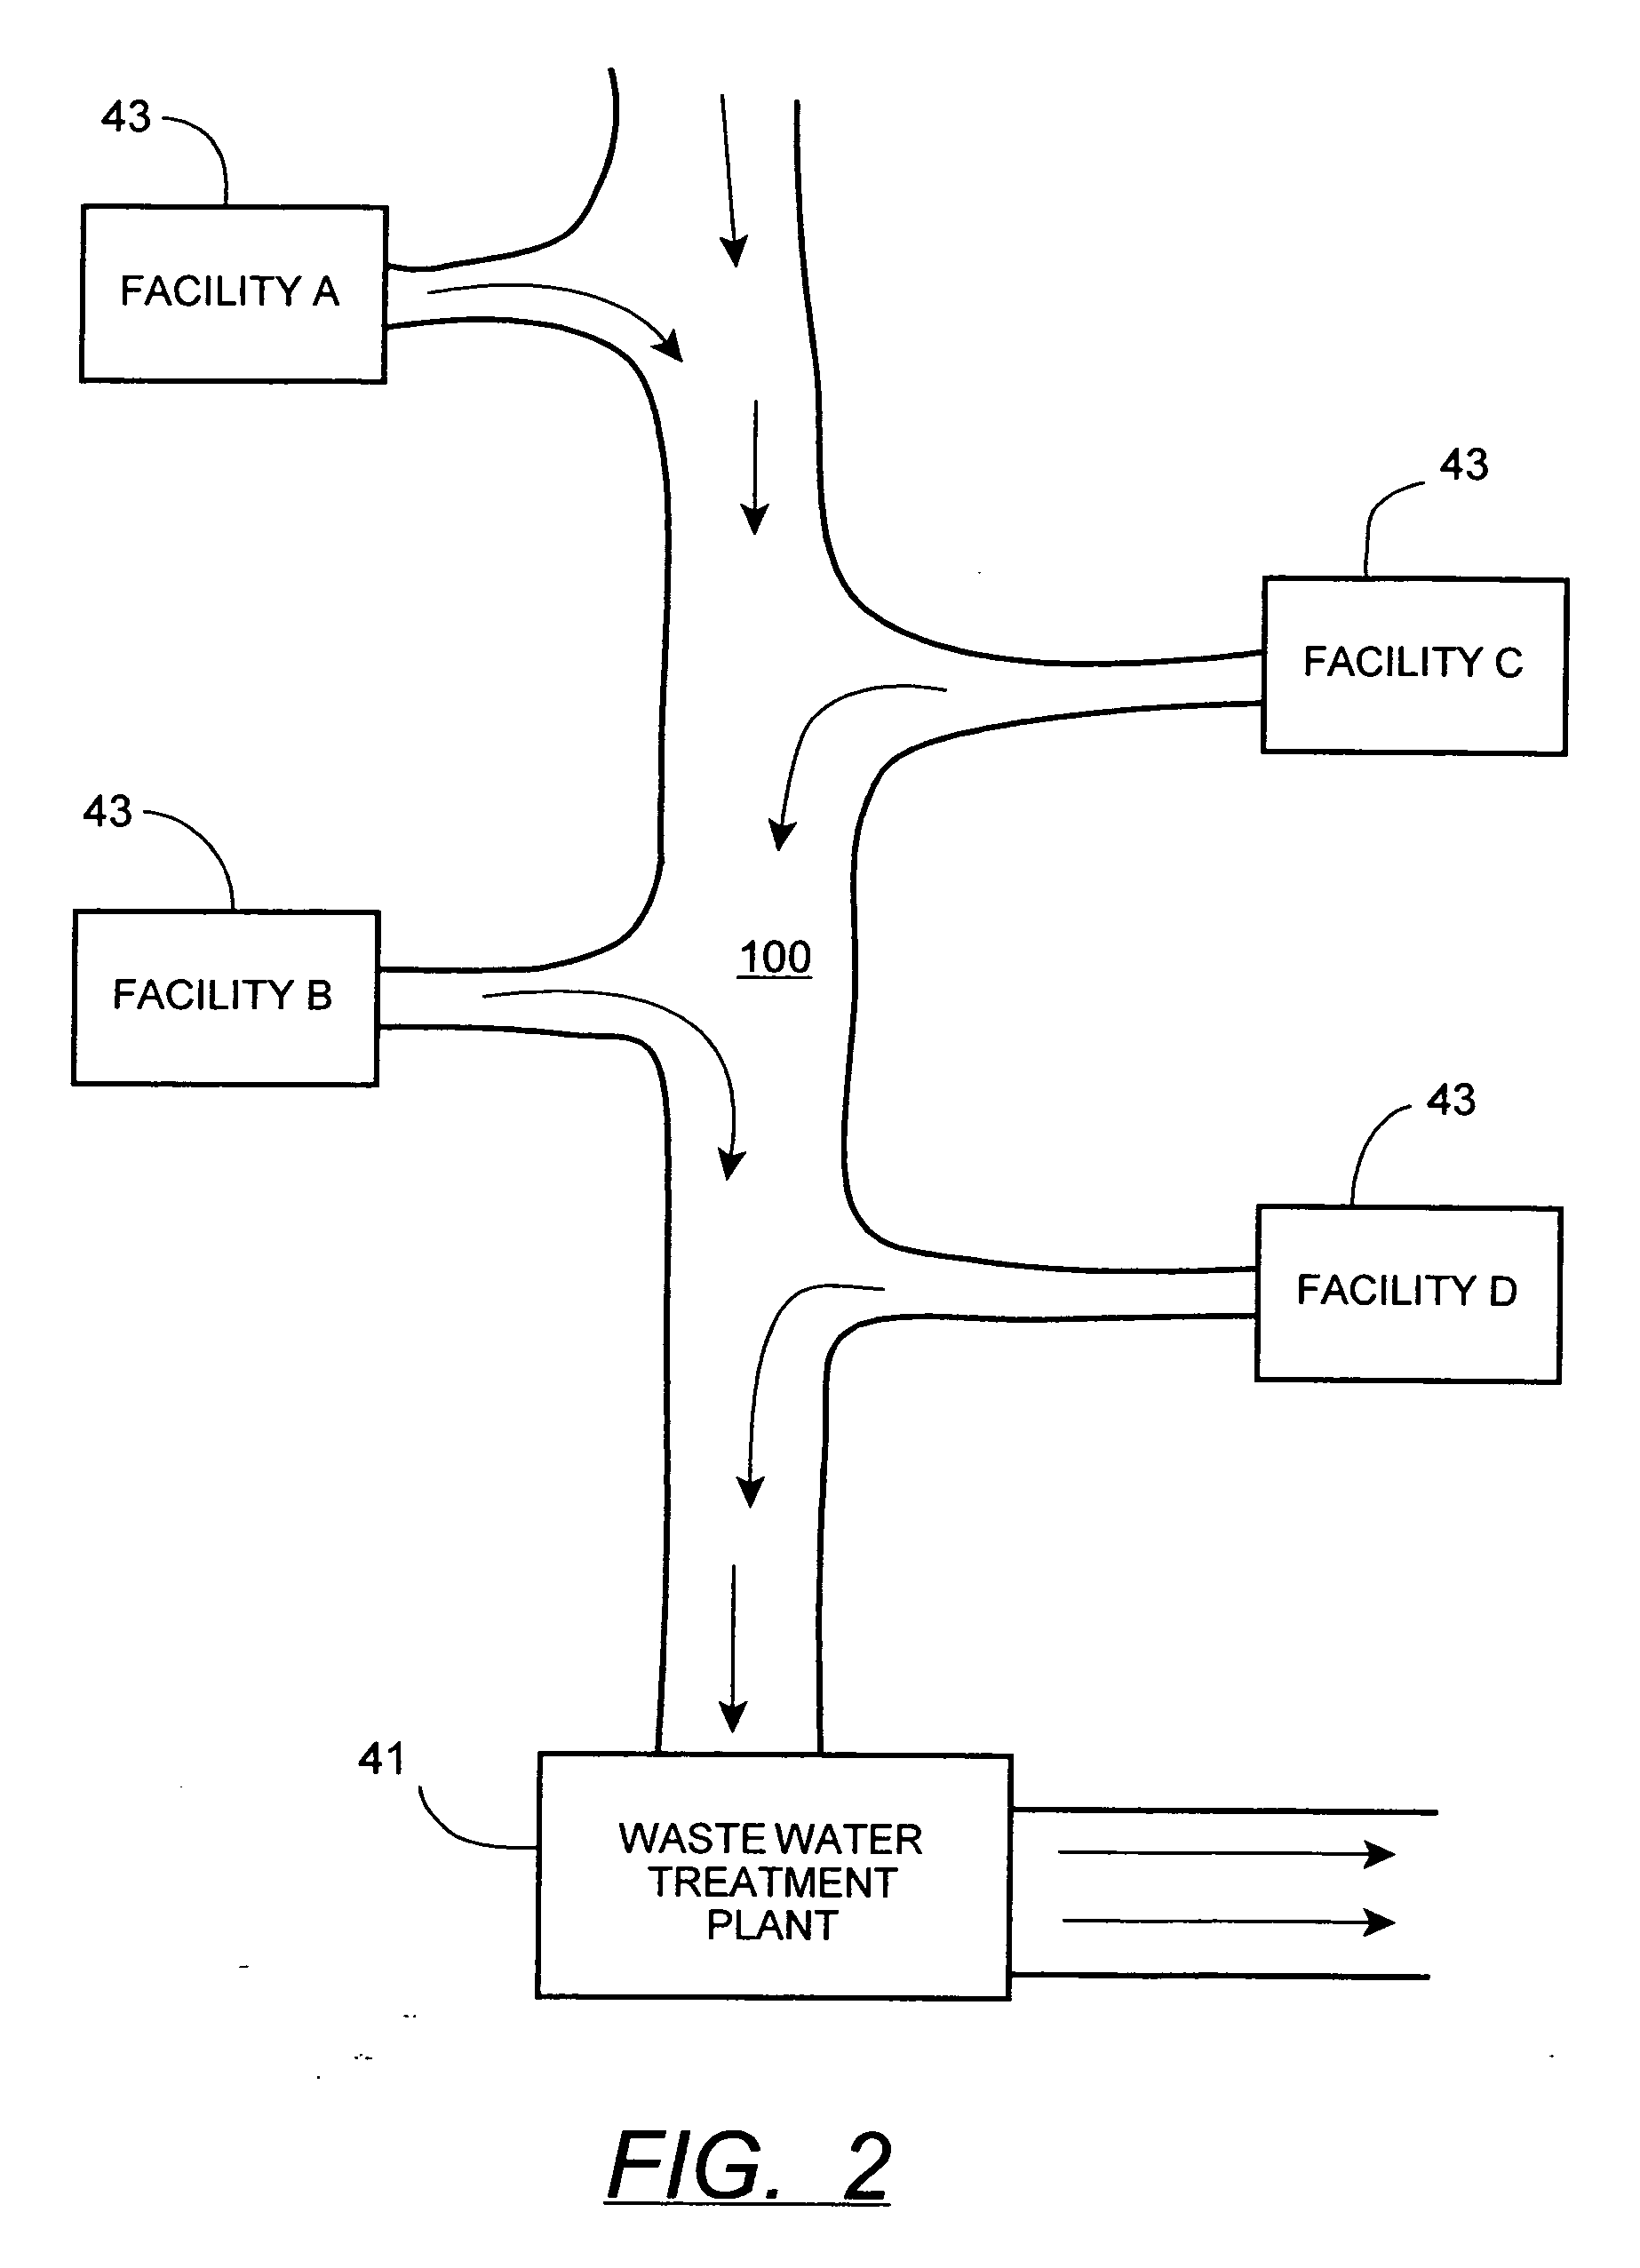 System for monitoring discharges into a waste water collection system